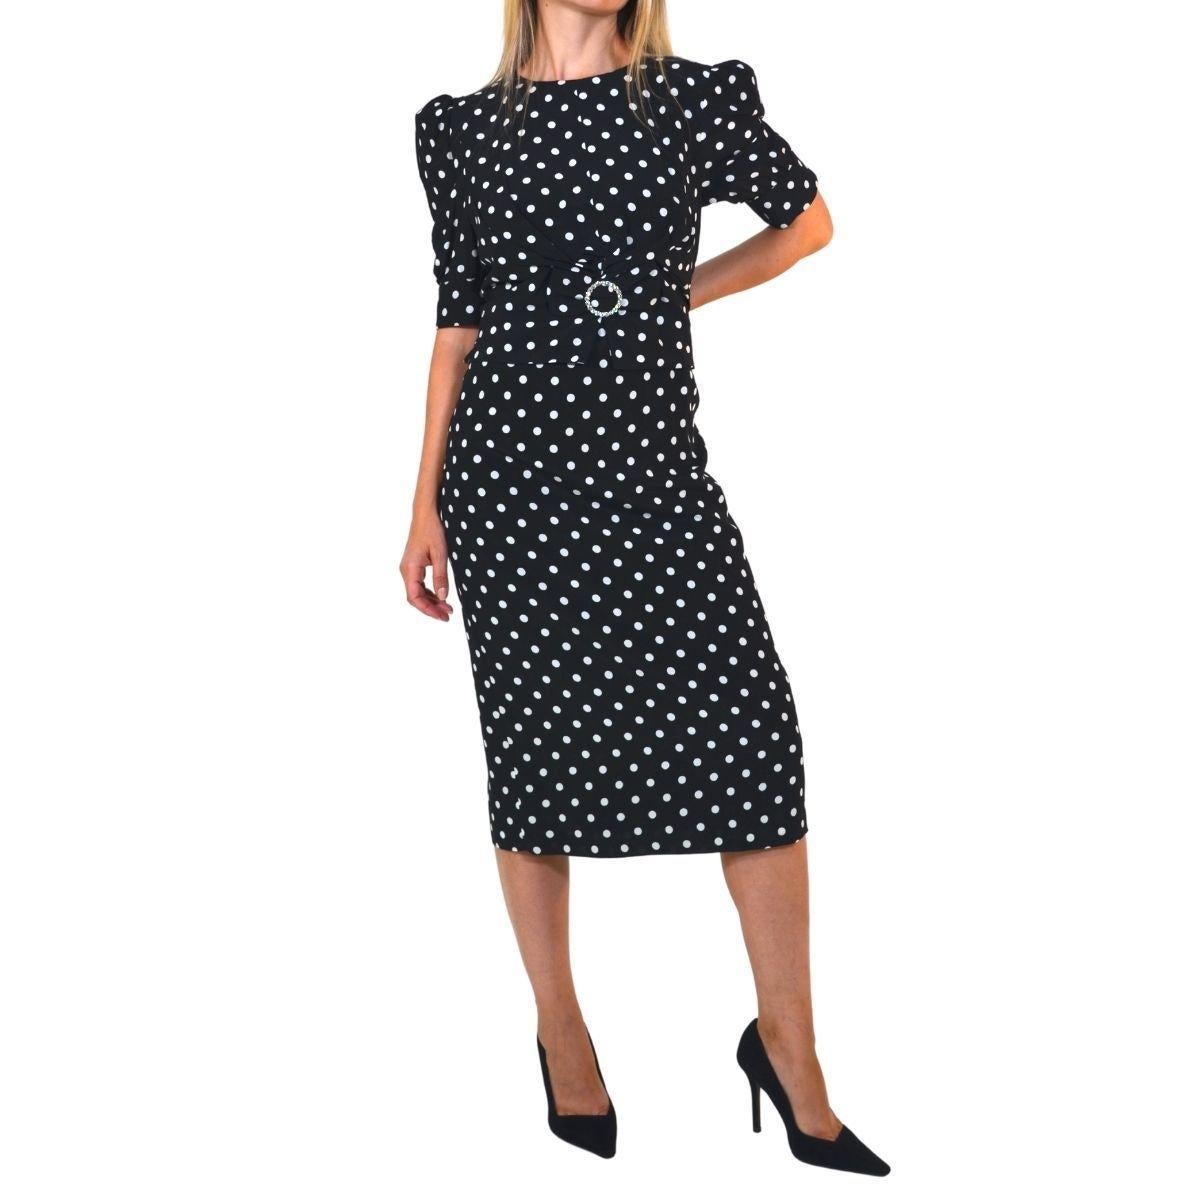 Alessandra Rich Black Polka Dot Fitted Silk Dress IT46 US10 For Sale 1